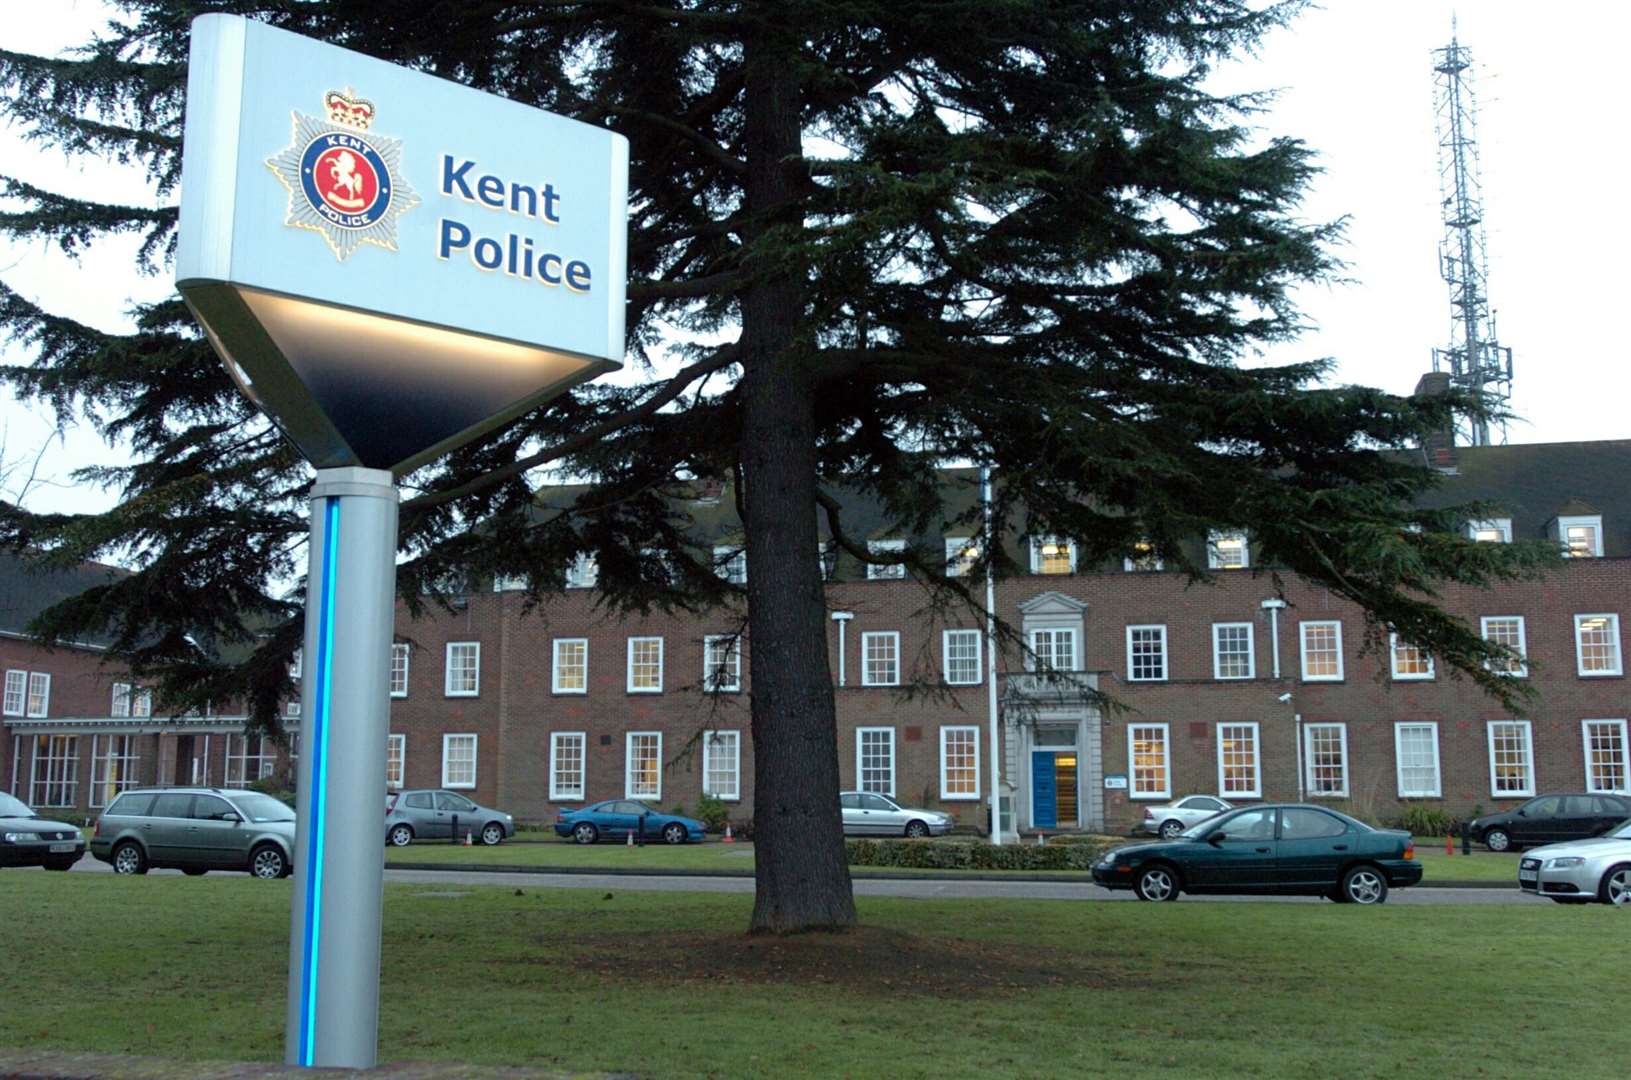 Kent Police has responded to the judge's comments